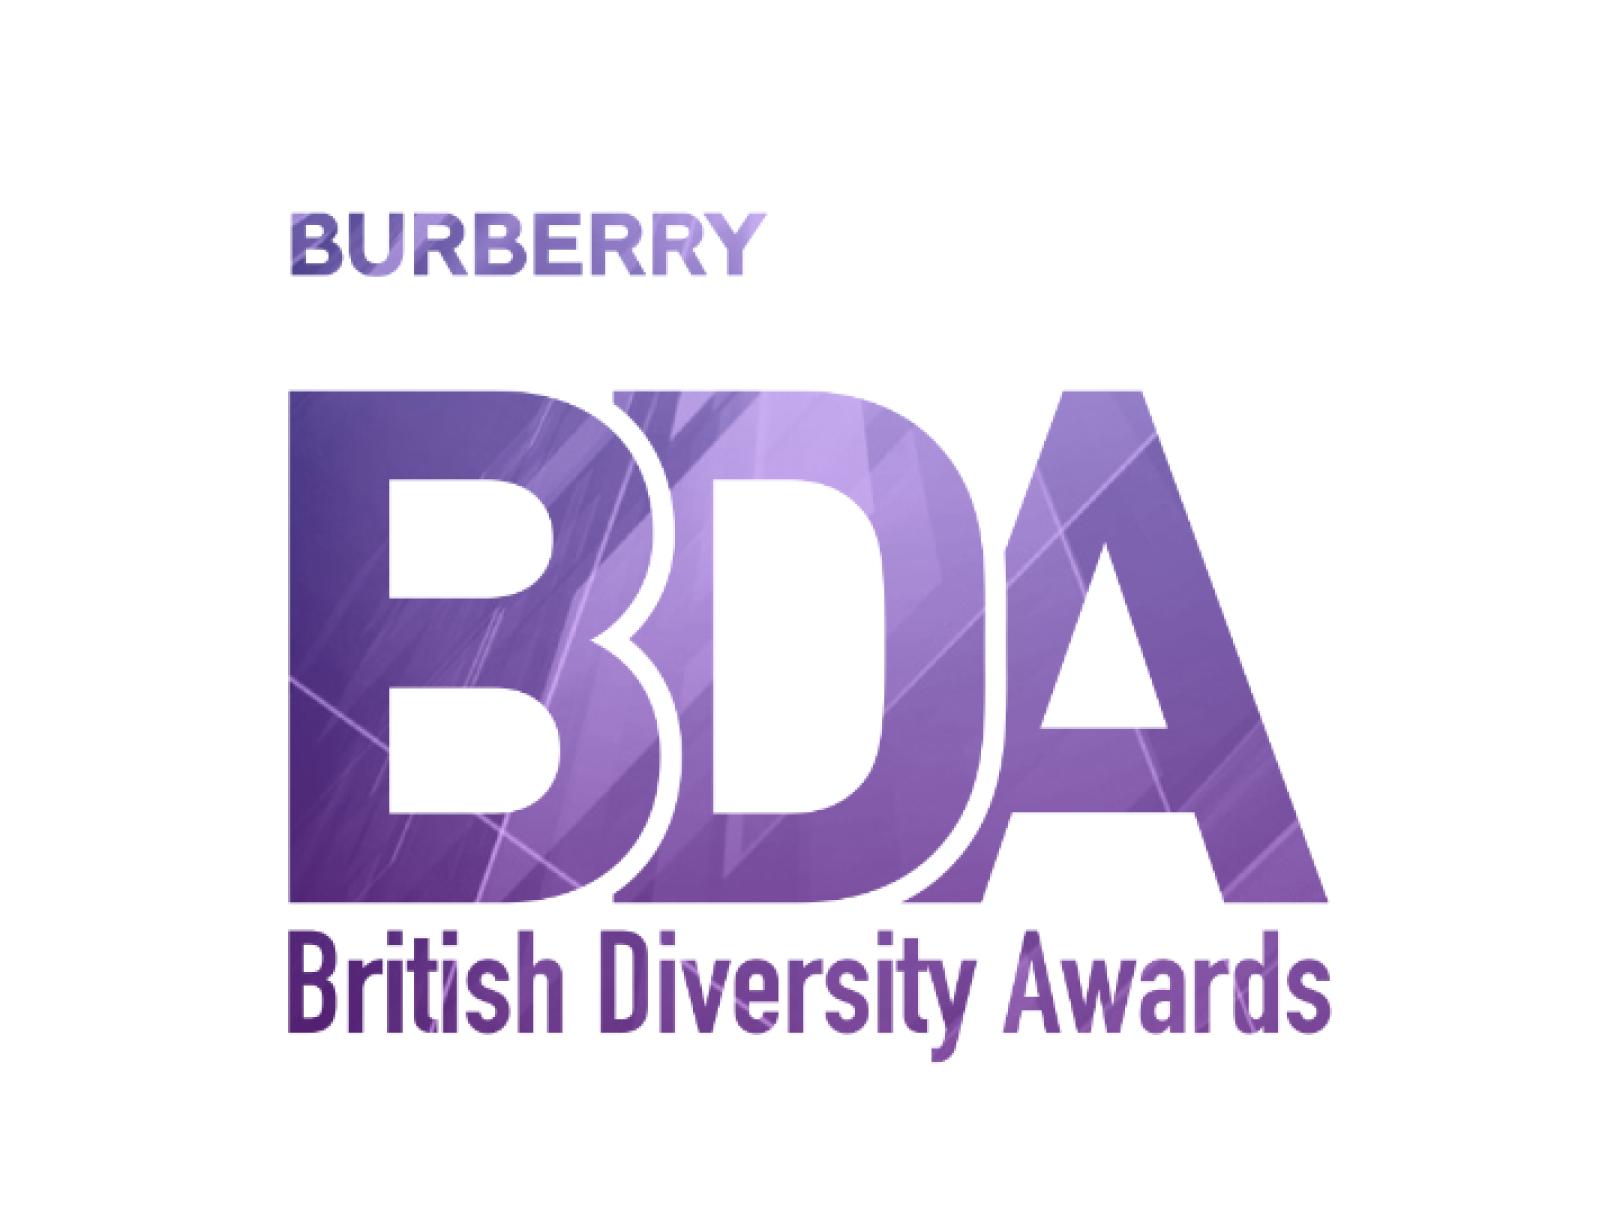 Boots UK awarded Company of the Year by Burberry British Diversity Awards